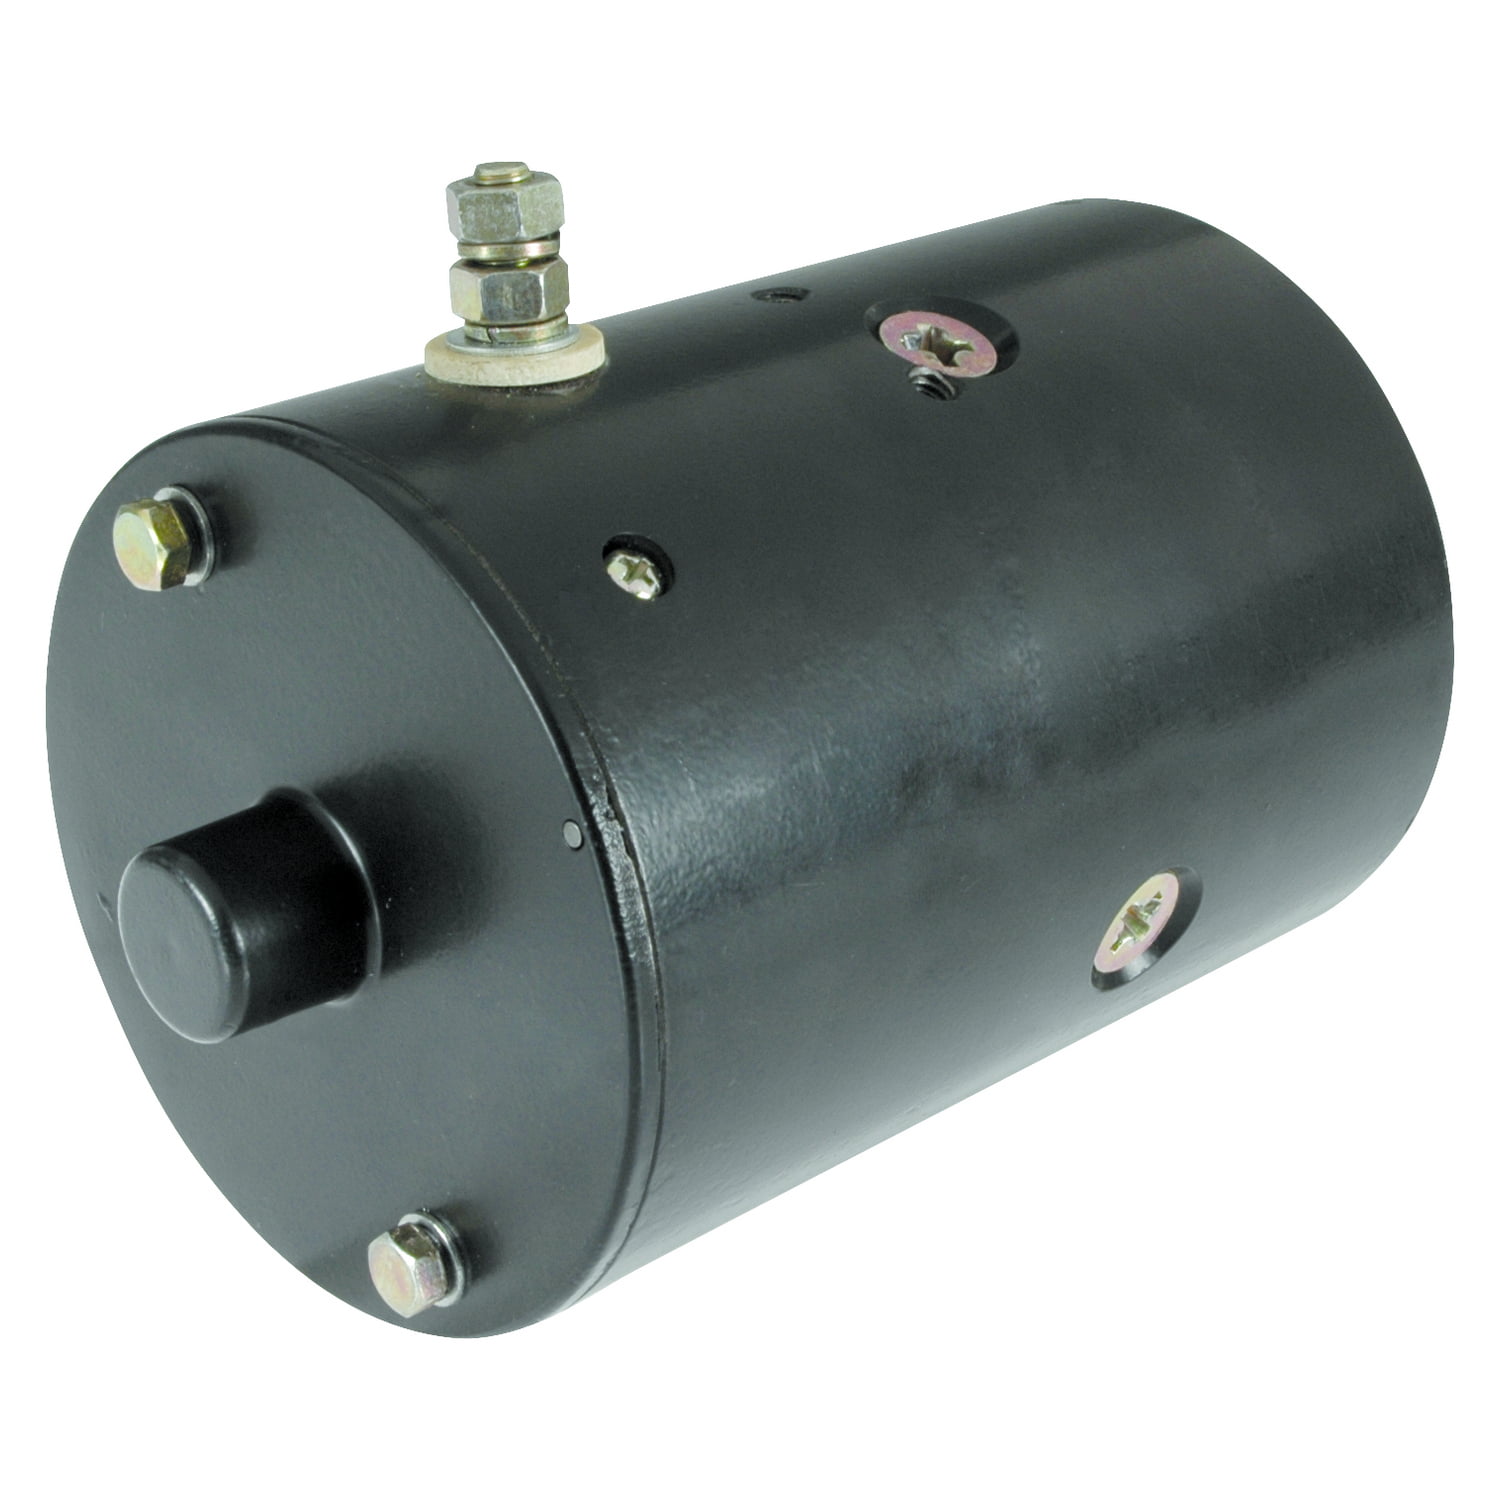 Monarch M319 Pump used in Power Packs such as Tommy Gate 4288 4289 4286